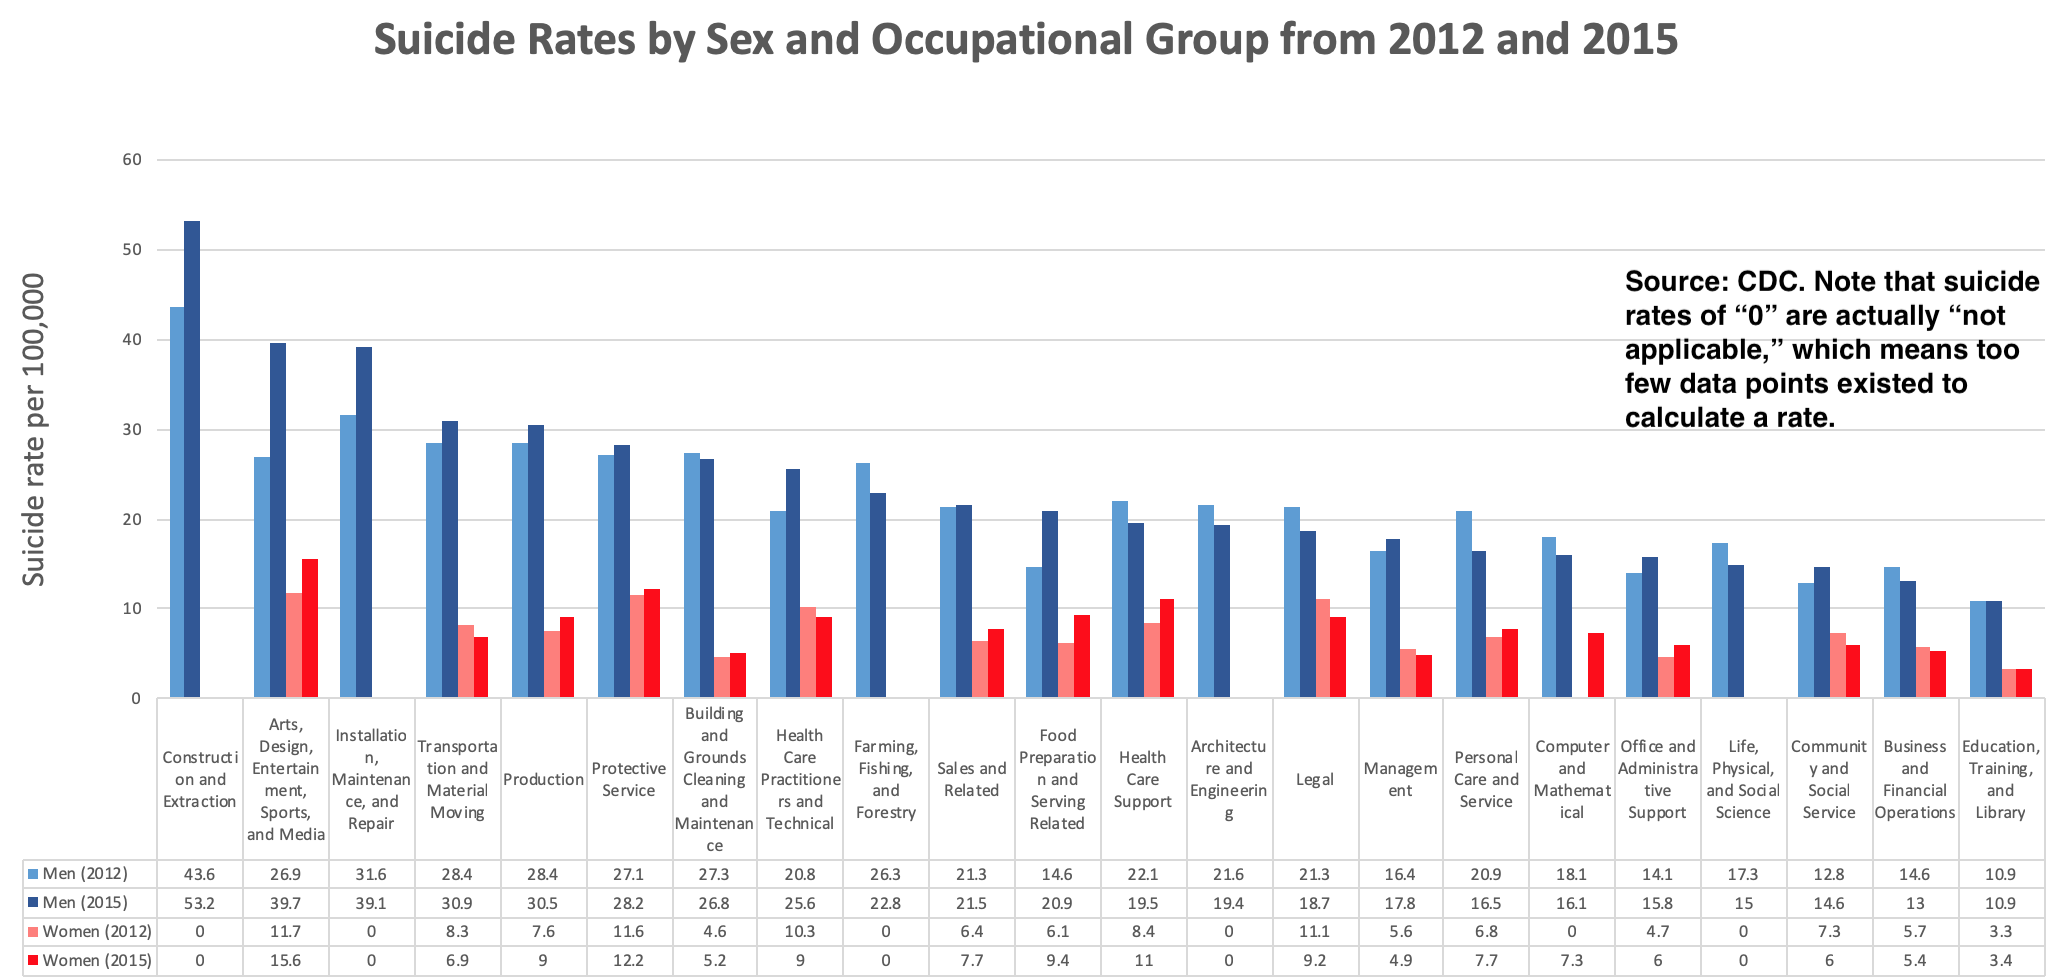 Suicide Rates by Sex and Occupation American Council on Science and